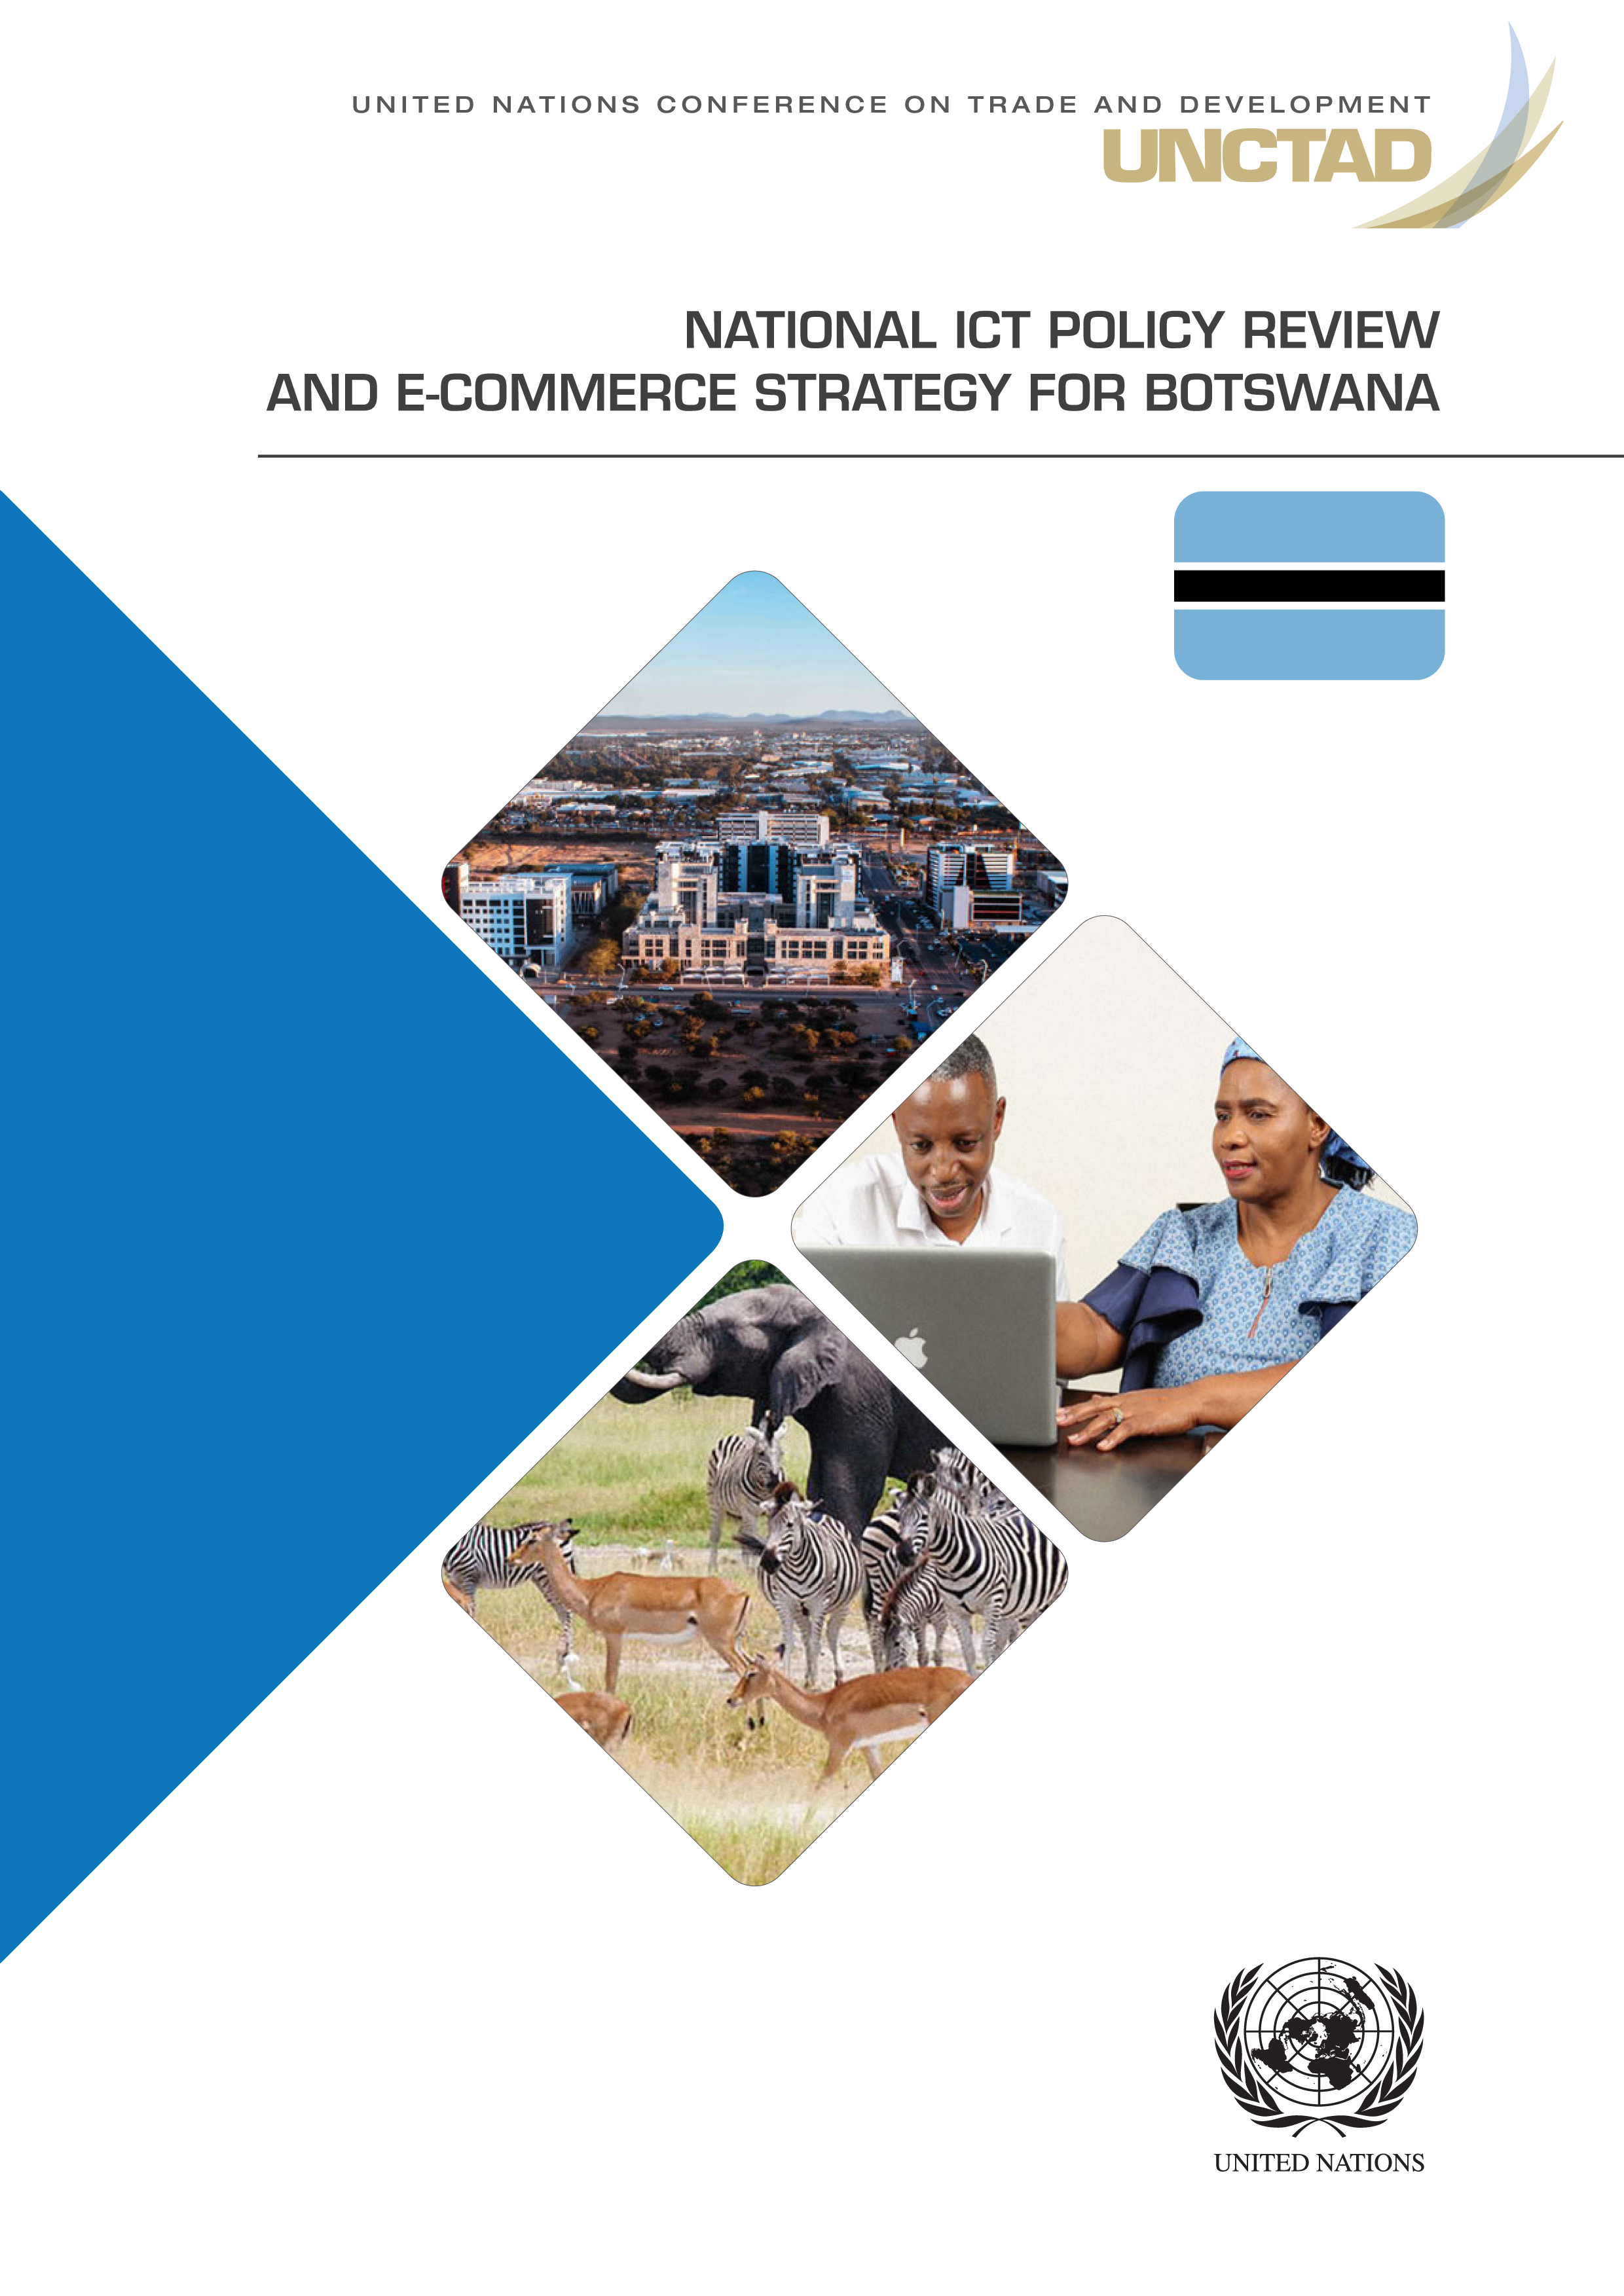 image of UNCTAD ICT Policy Review and National E-commerce Strategy for Botswana